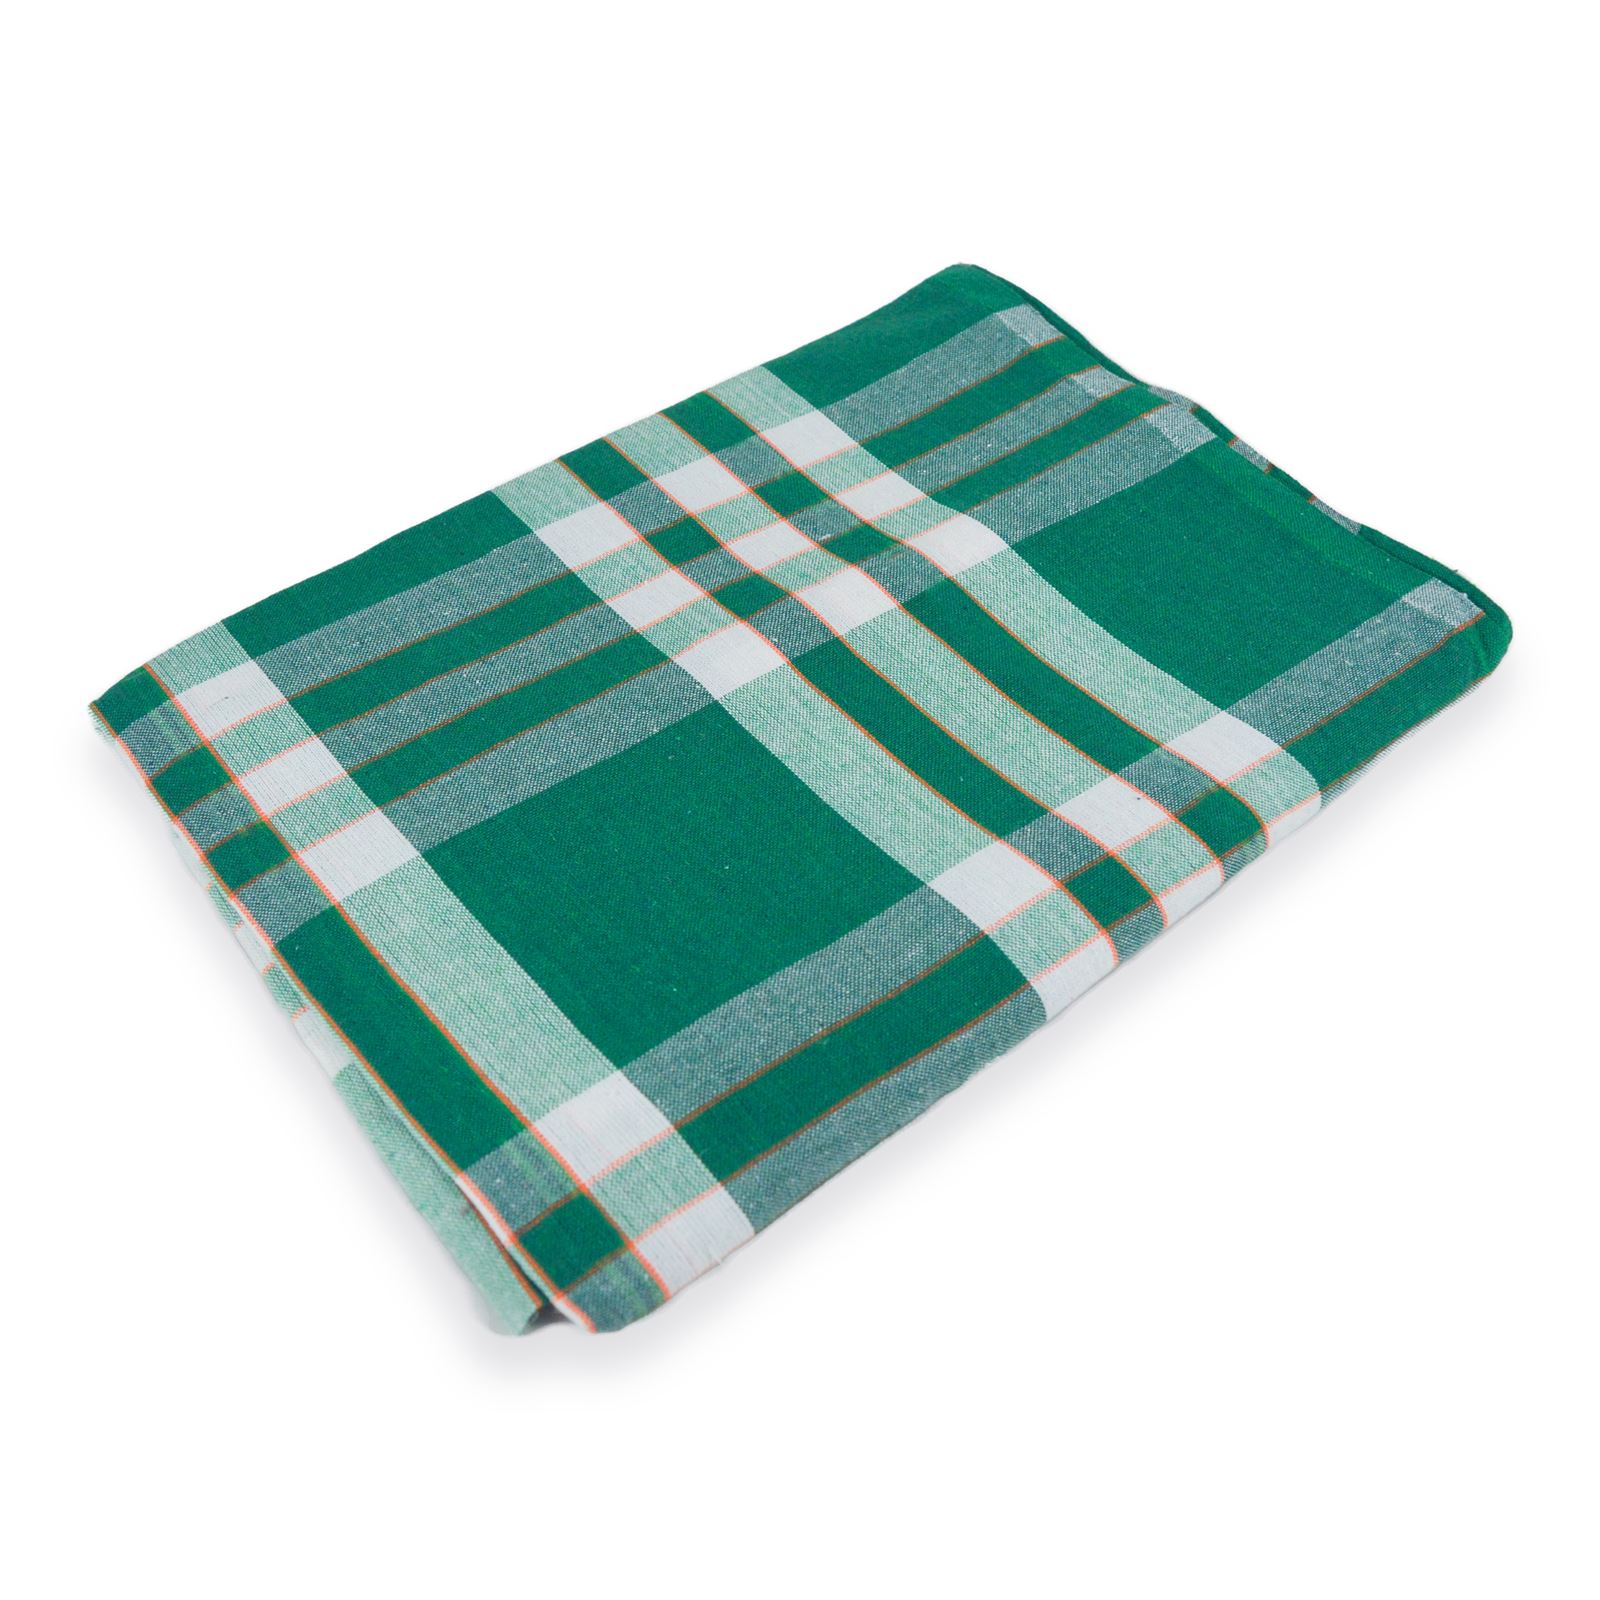 Green Handloom Cotton Bed Sheets 54x80 (Inches) Checkered Style for Double, Single Beds